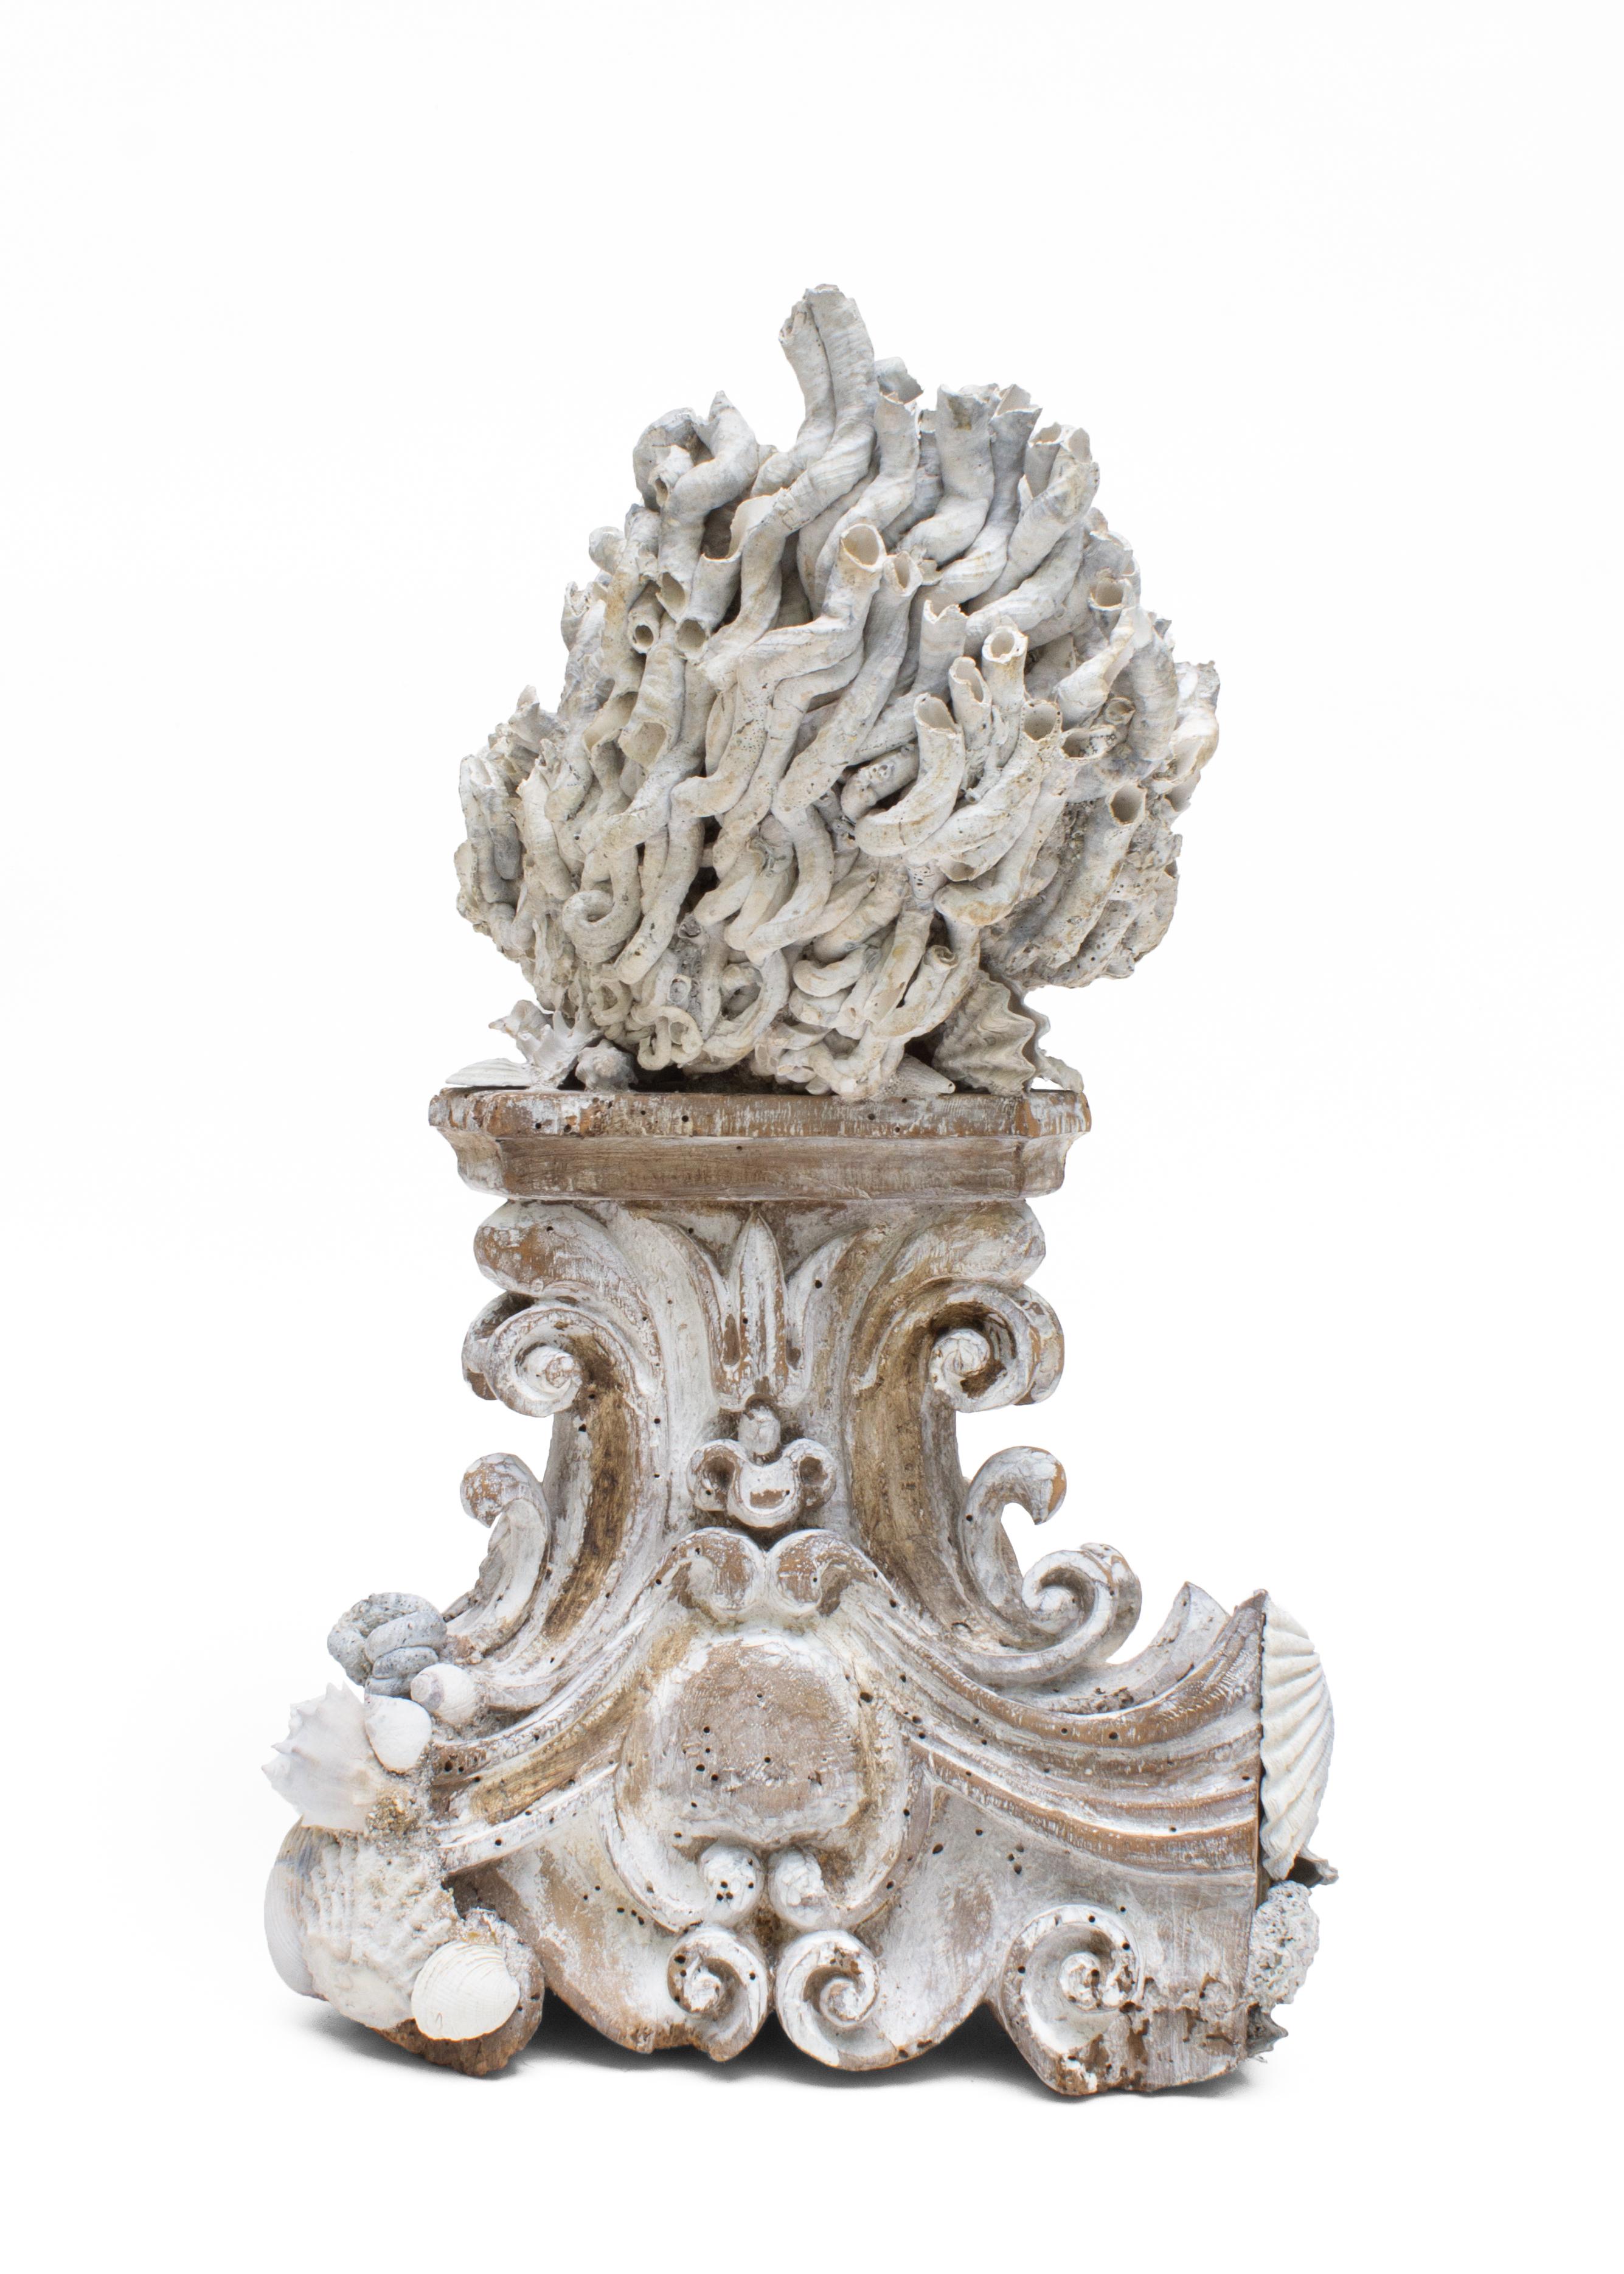 Hand-Carved 18th Century Italian Hand Carved Base with Siliquaria and Fossil Shells